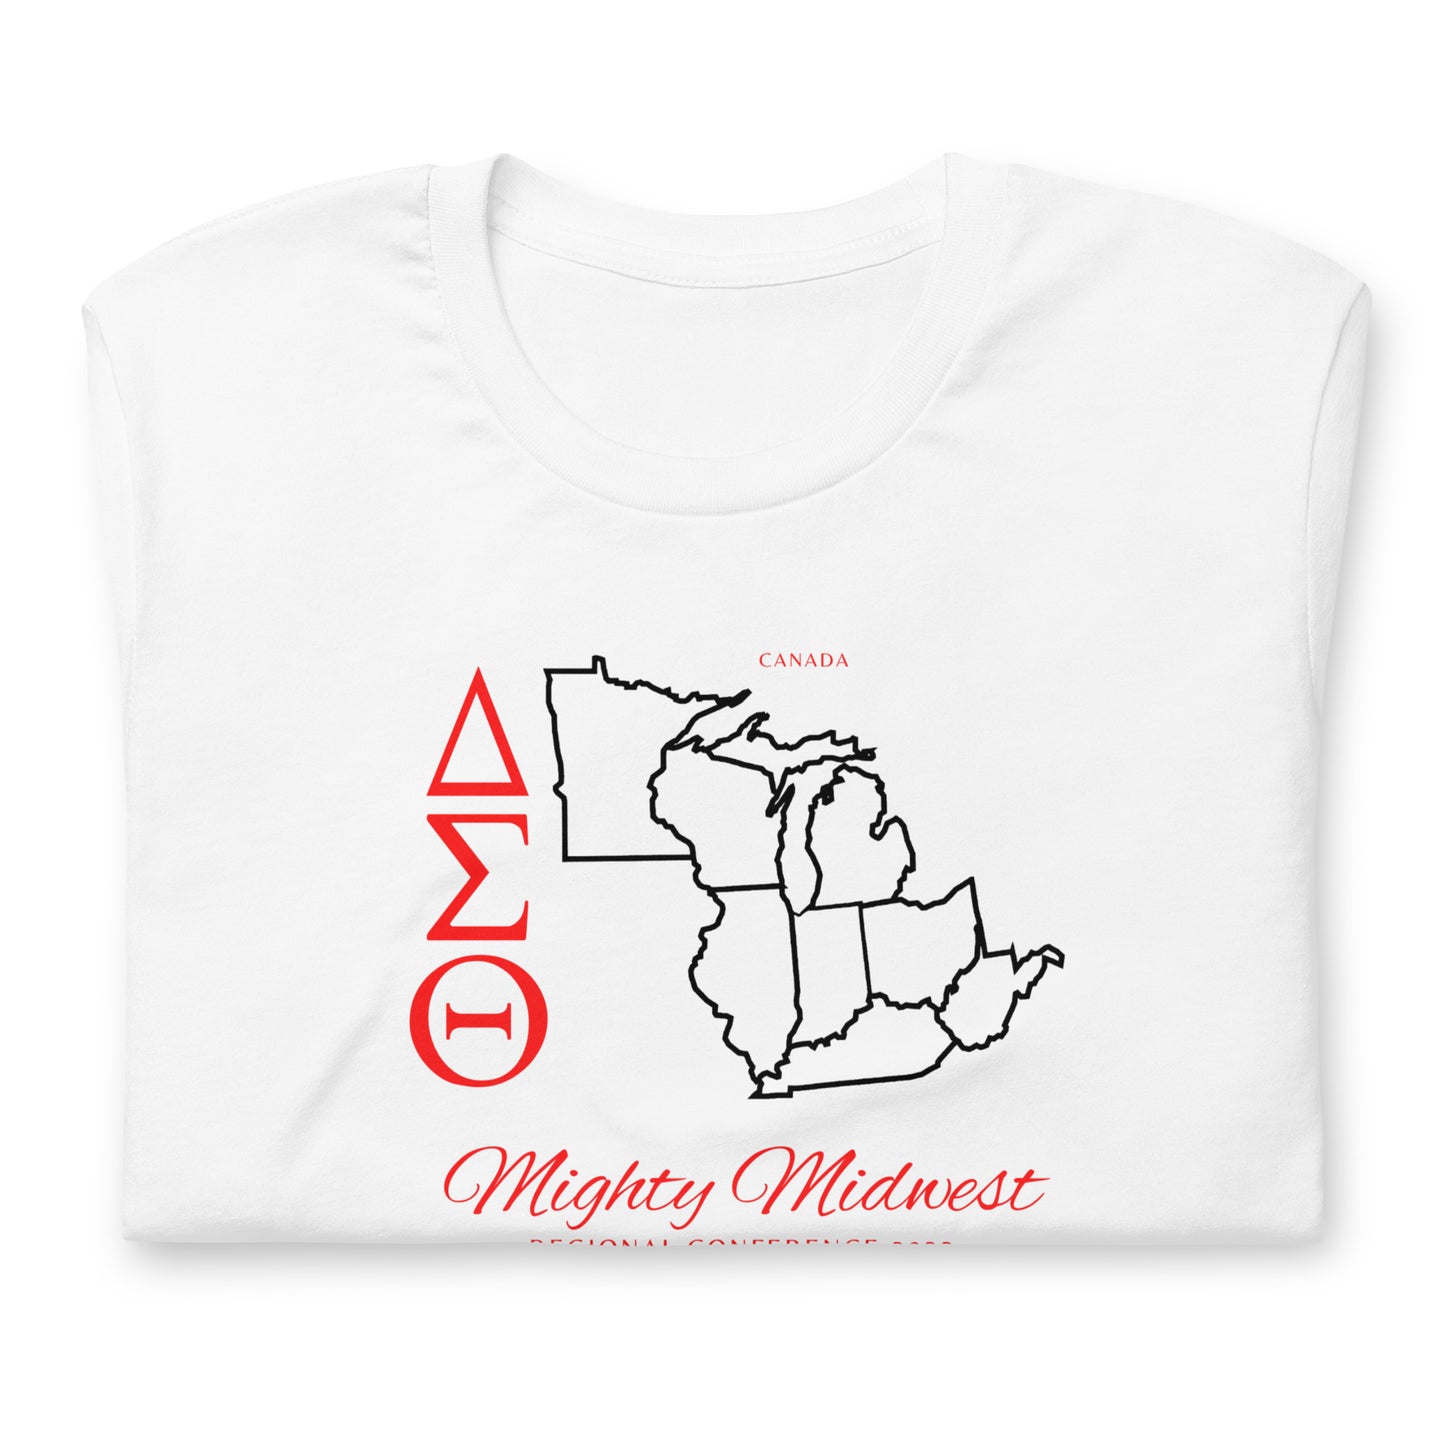 Midwest 2022 Regional Conference T-Shirt